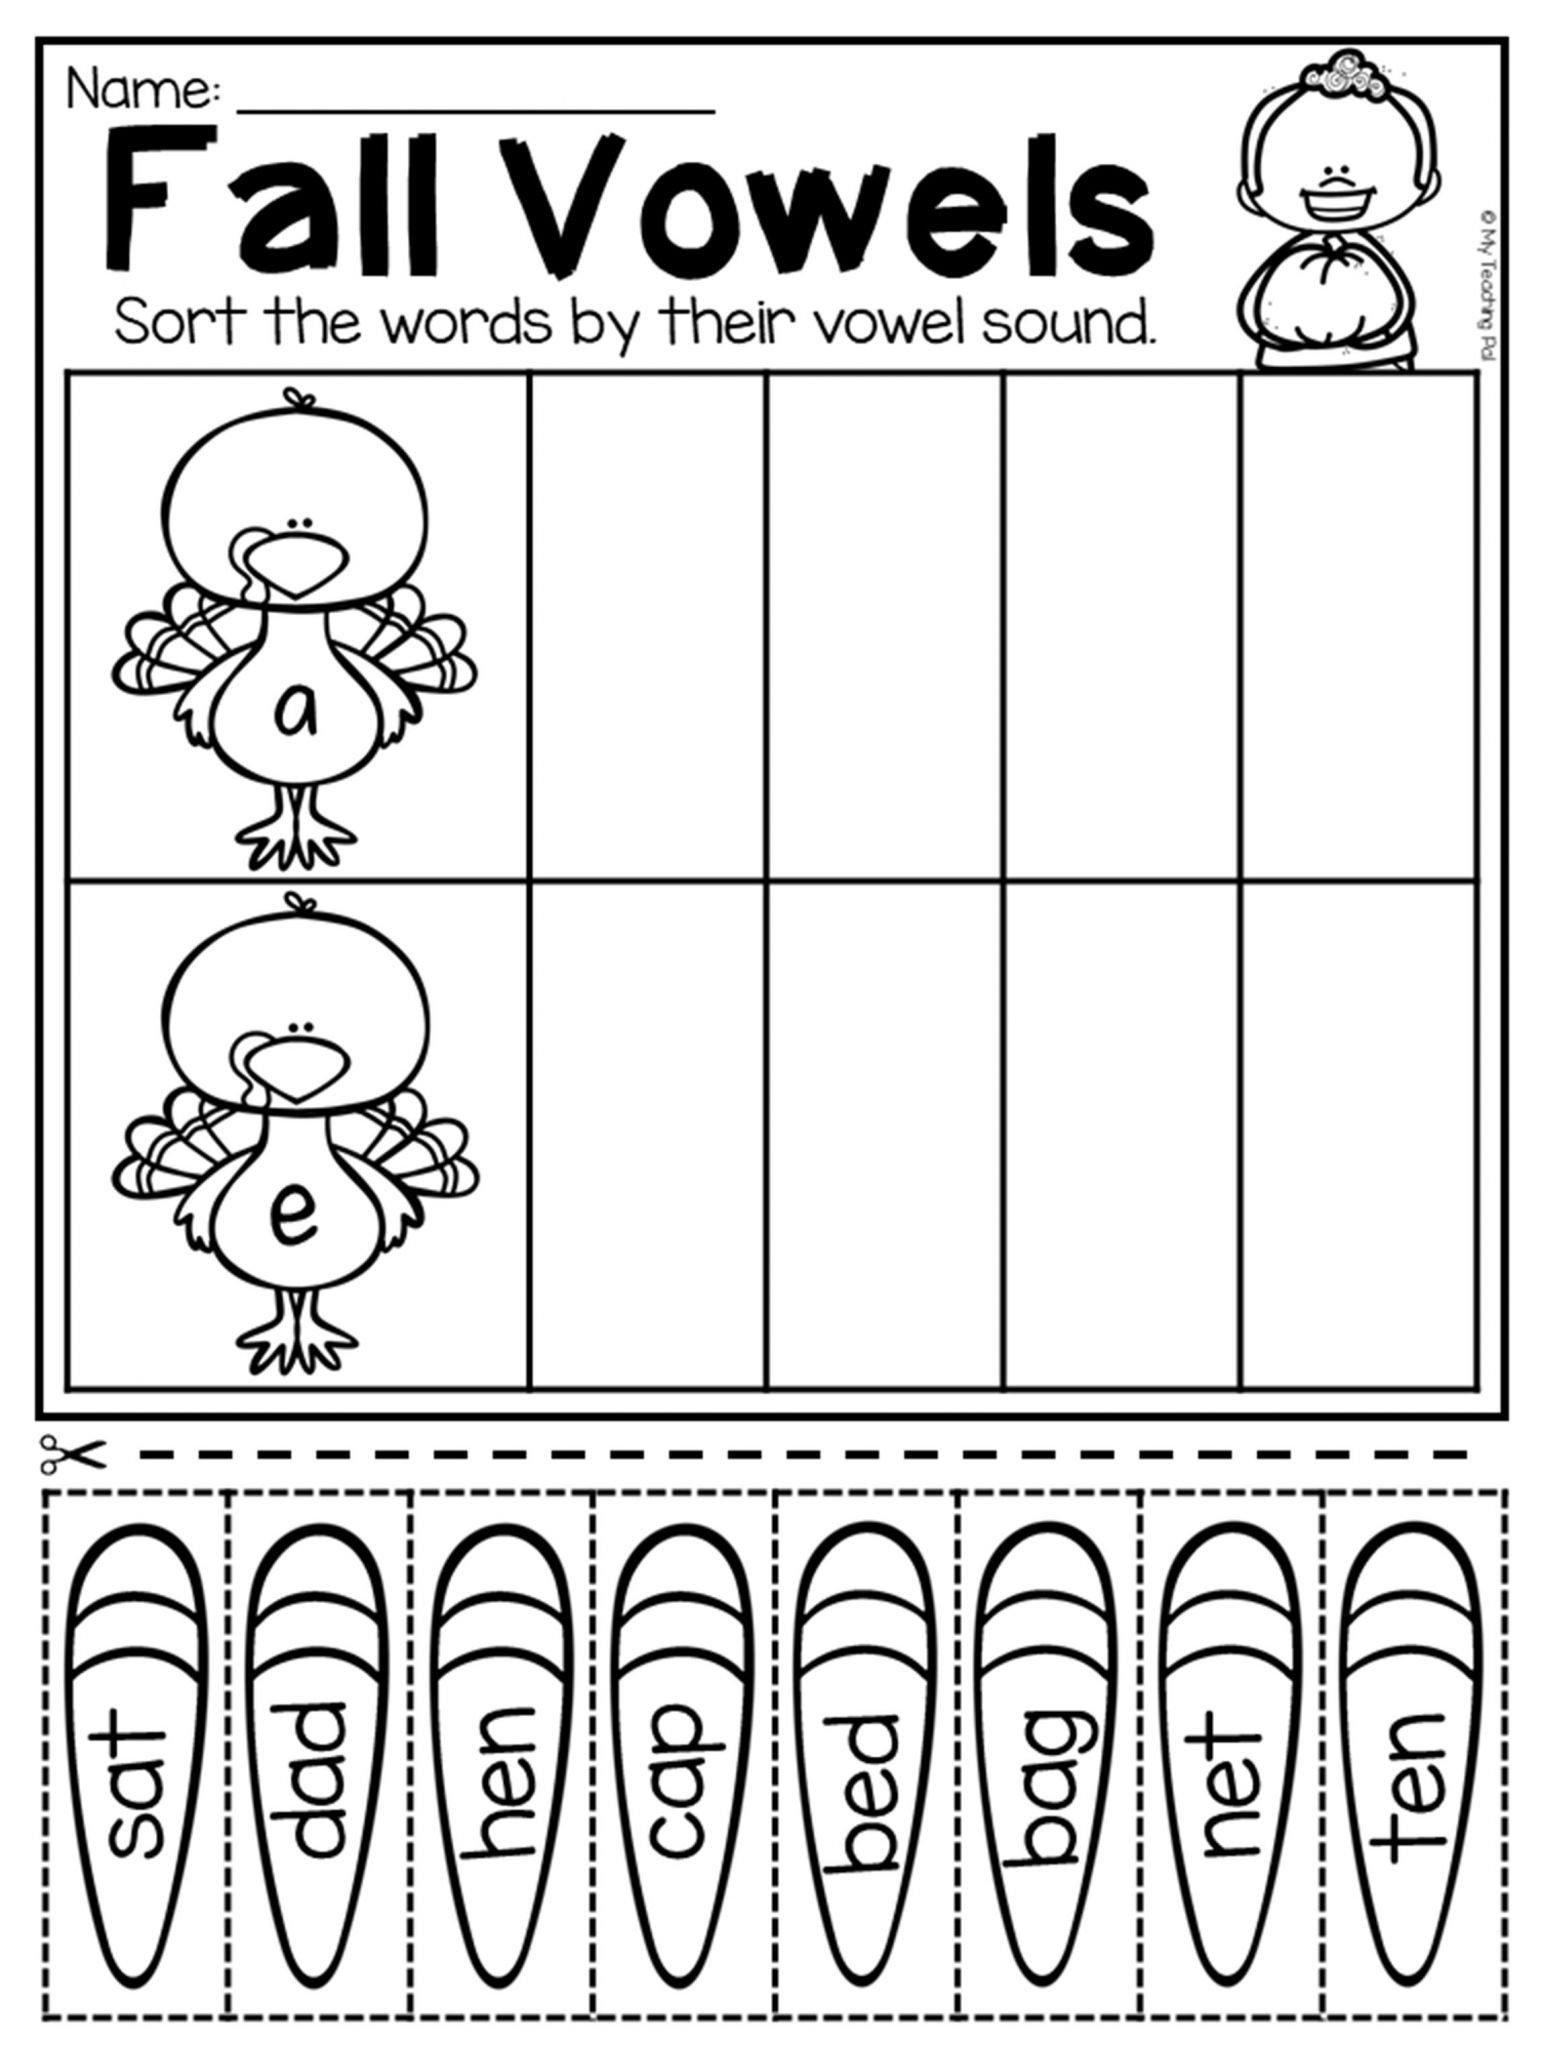 Counting Techniques Worksheet